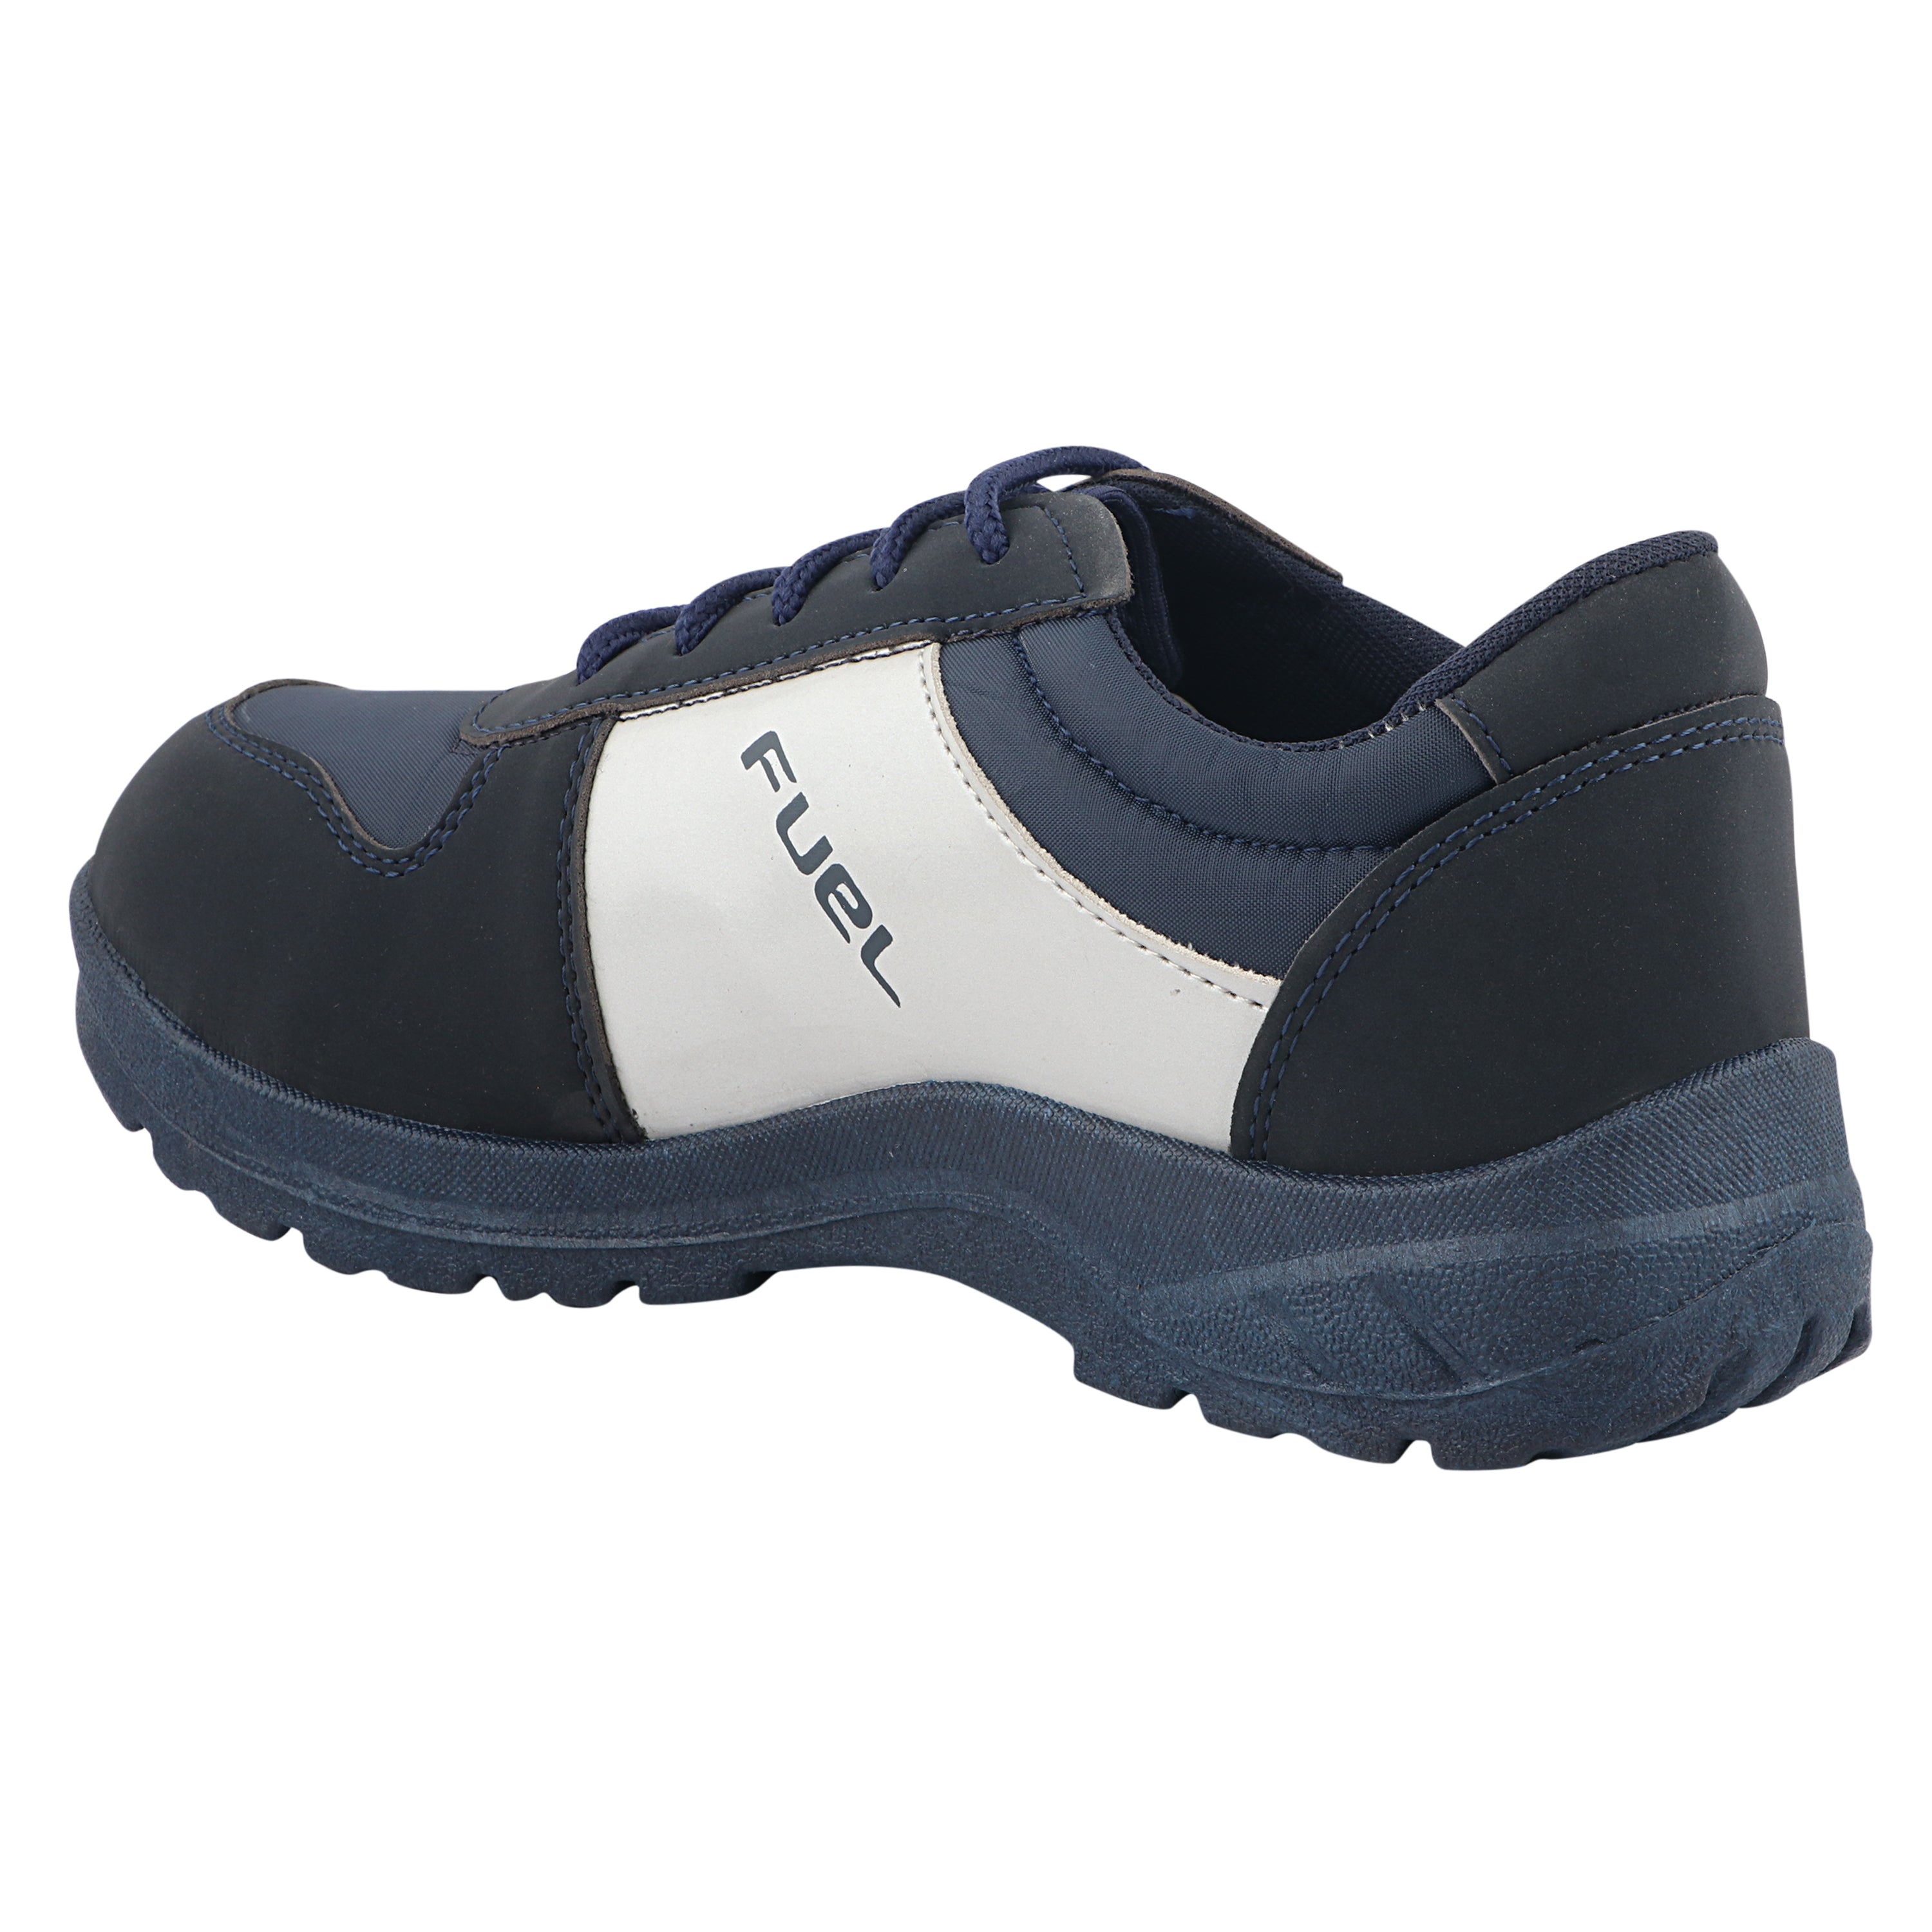 Fuel Ultra Breathable Upper Safety Shoes for Men's Steel Toe With Single Density PVC Sole (Blue)